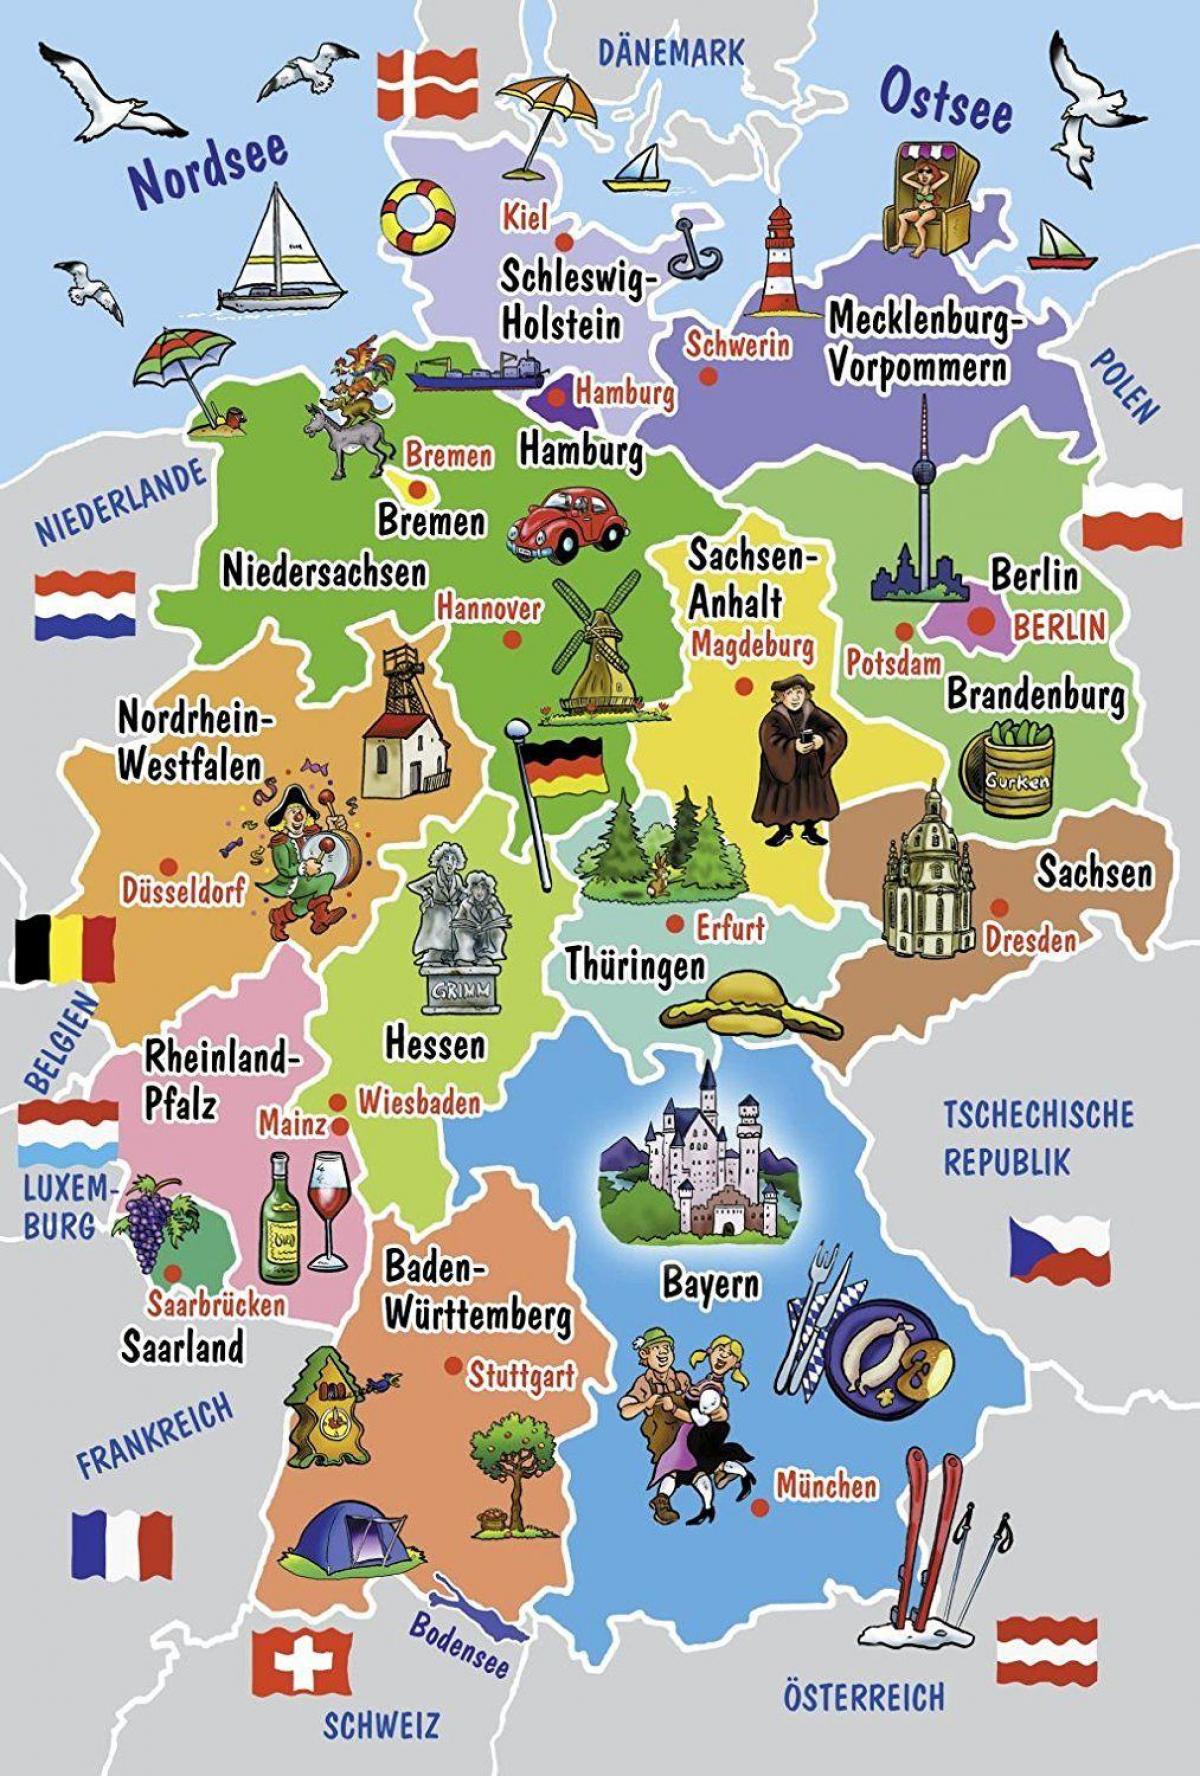 Germany tourist attractions map